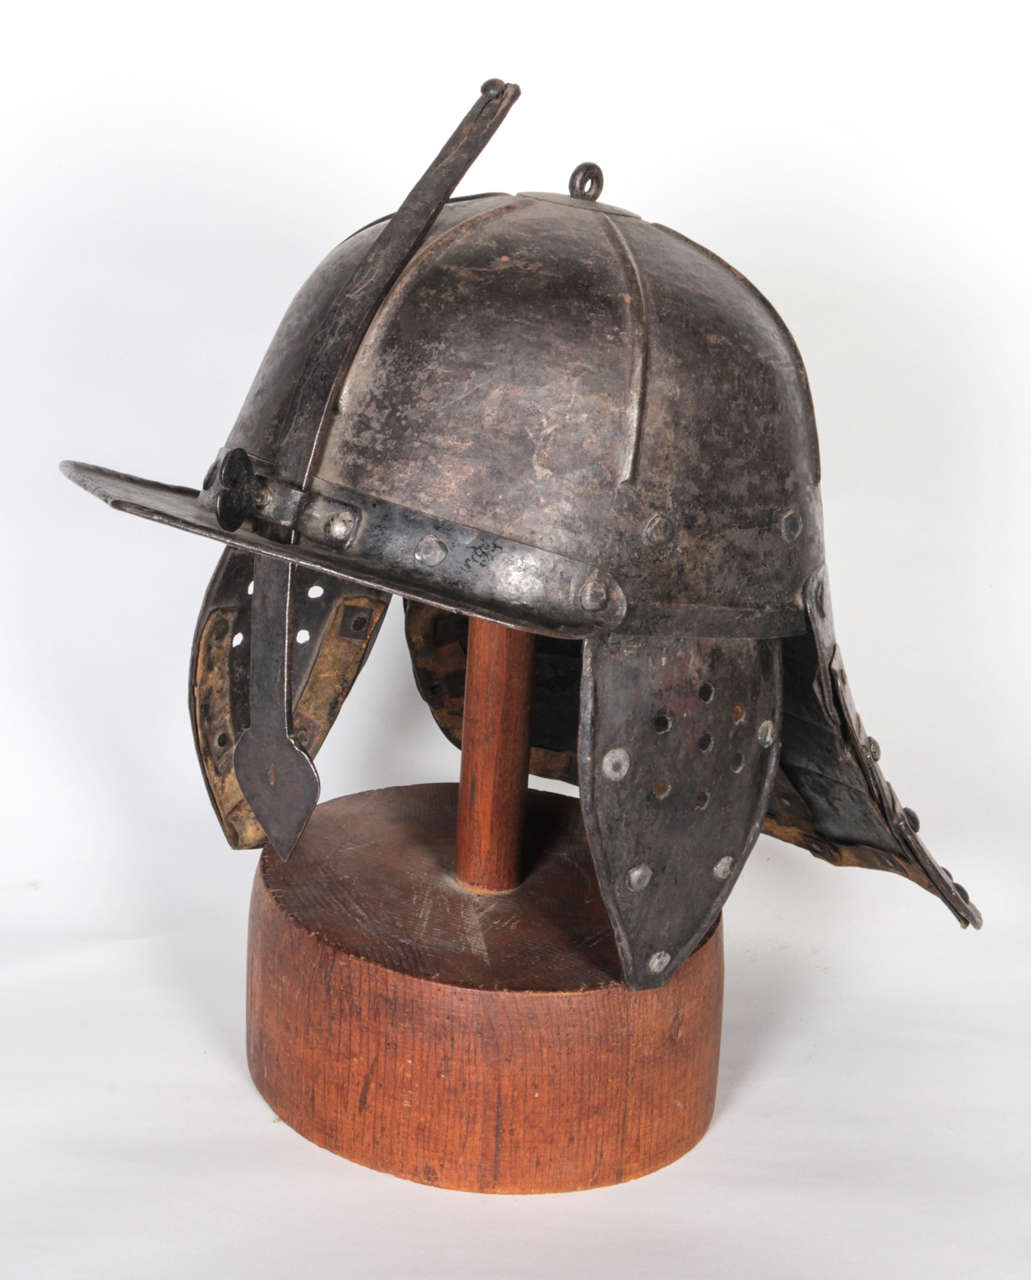 English, circa 1640's Roundhead (Parliamentary) helmet. Made of mill-rolled steel and riveted construction. It has a 'lobster tail' articulated neck guard and adjustable nasal guard secured with a heart-shaped wing nut. The helmet's textured surface